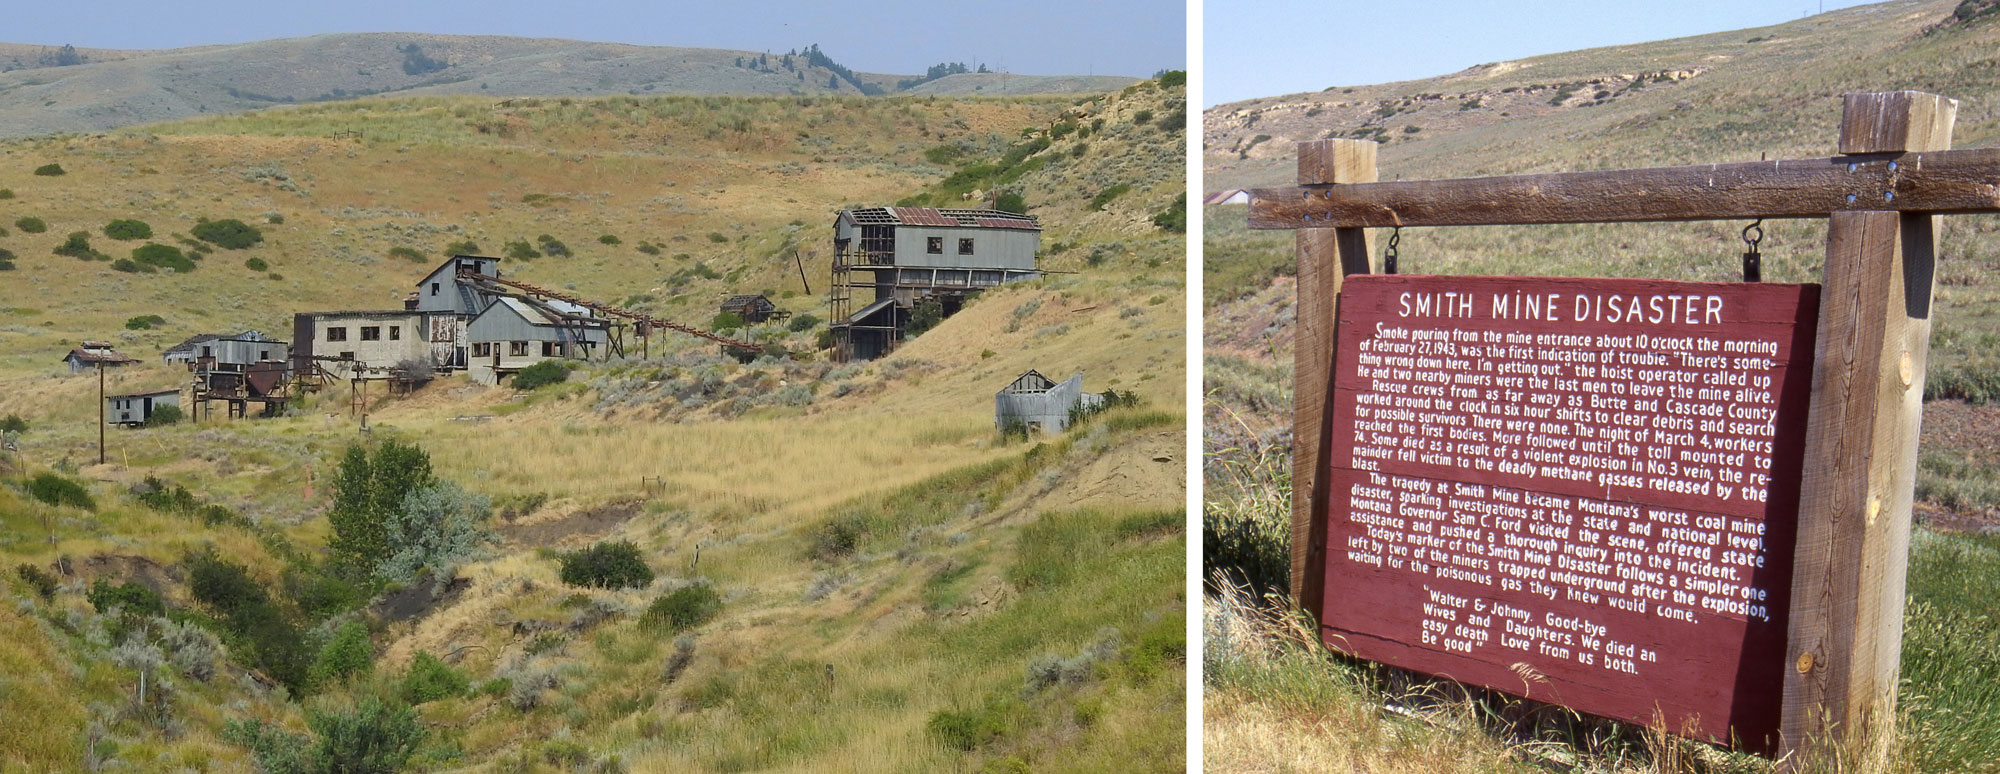 2-Panel figure showing the Smith Coal mine, where an explosion killed over 70 miles in 1943. Panel 1: Buildings at the abandoned mine. Panel 2: Informational sign about the disaster.